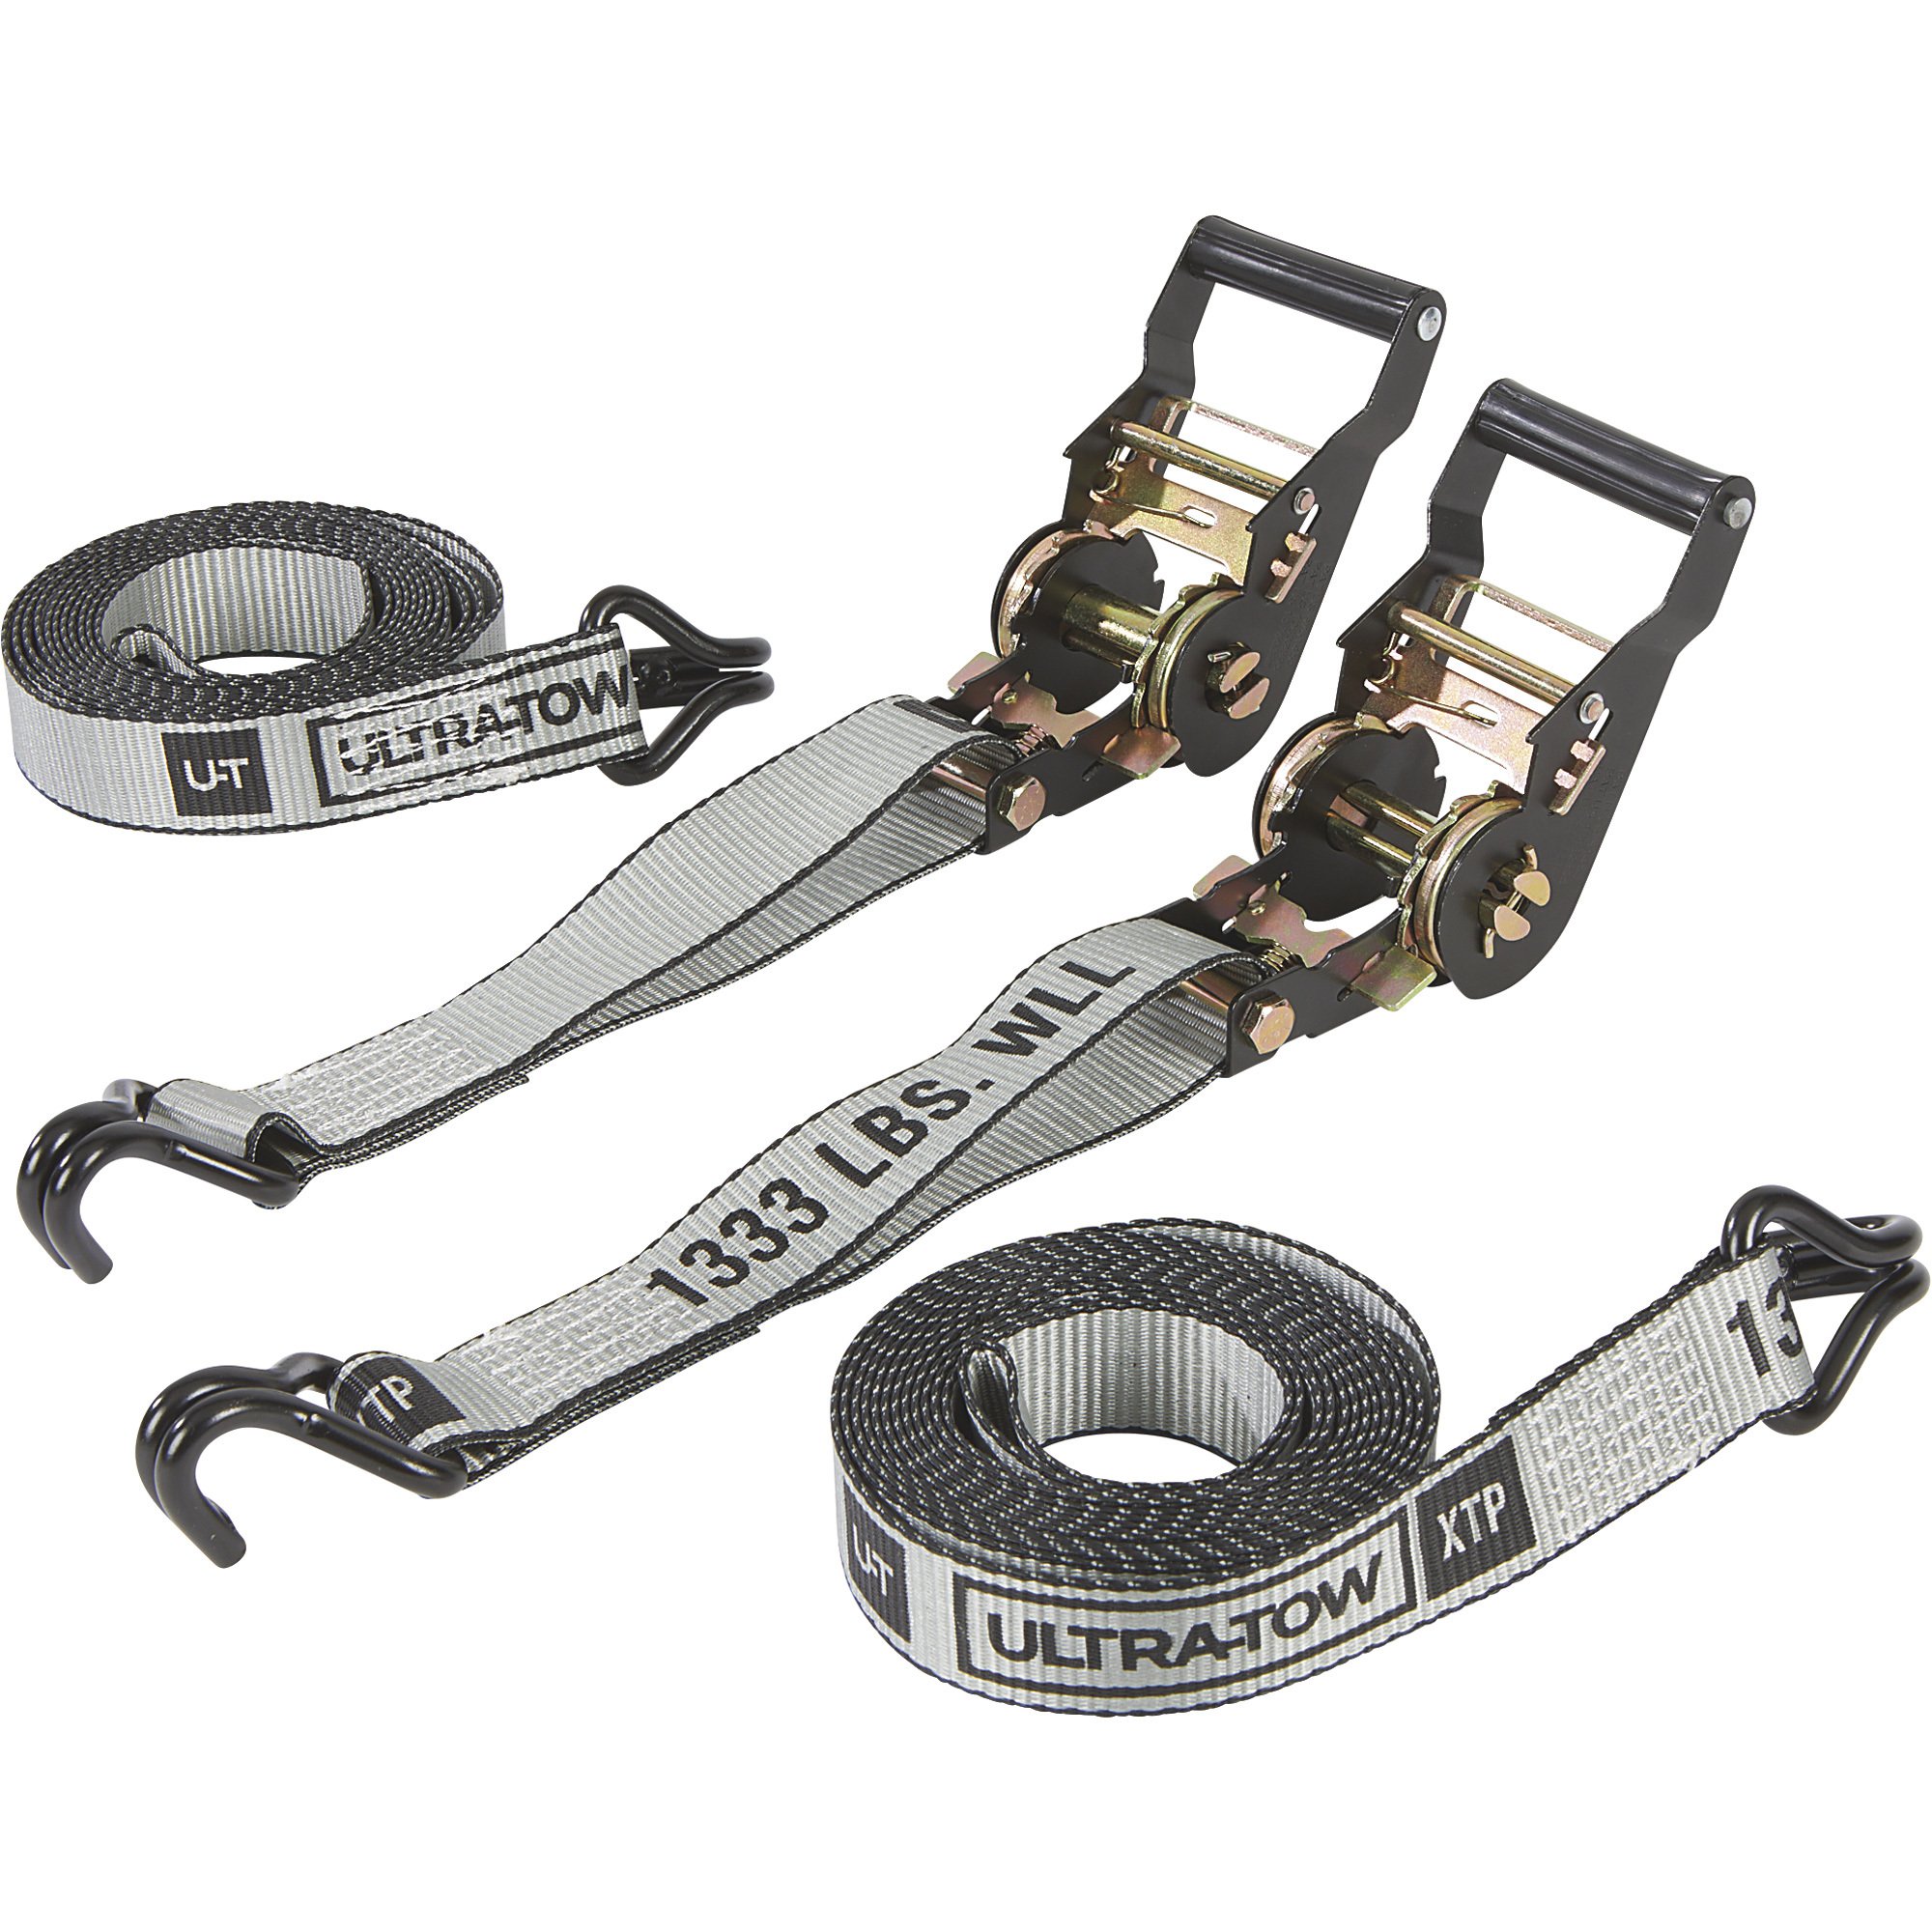 Ultra-Tow XTP 1.5in. x 14ft. AST Ratchet Strap with J-Hook, 4000